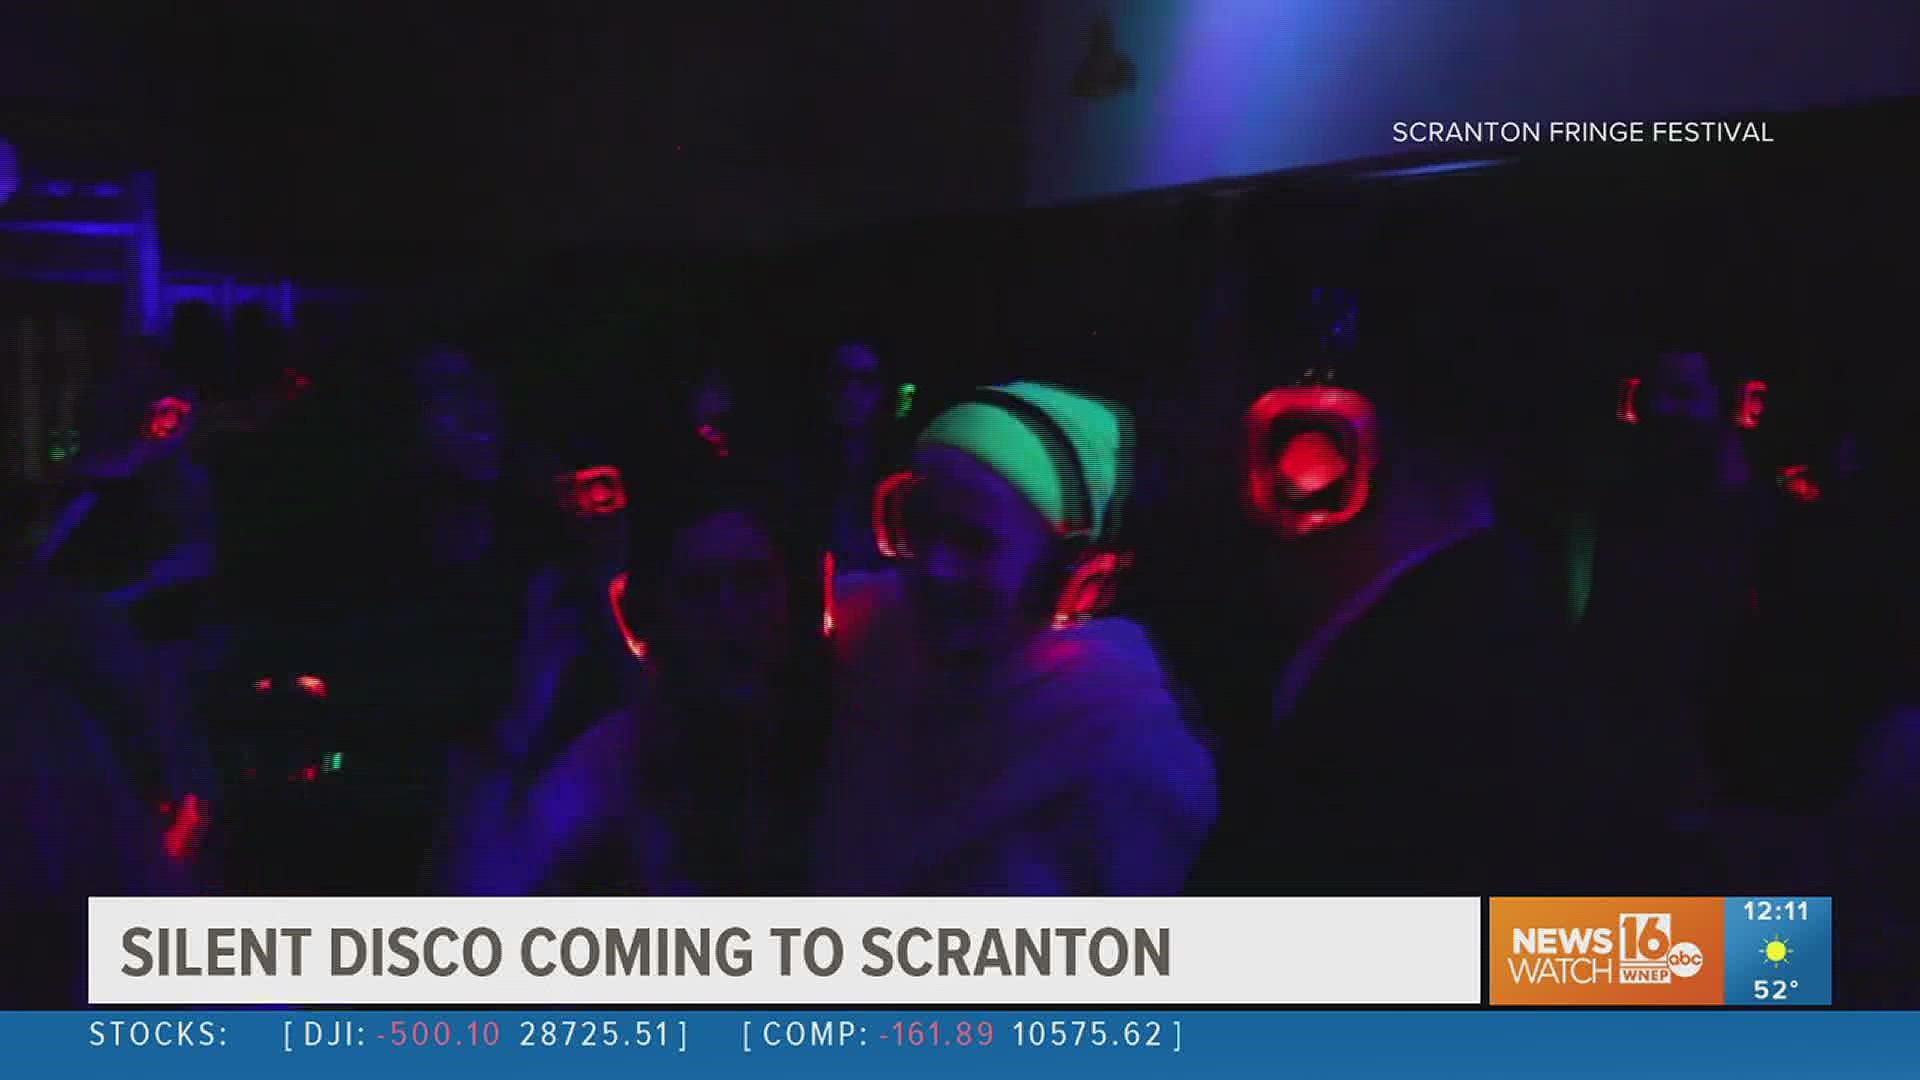 There will be no need for a stereo at a dance party this Friday. Scranton Fringe Festival organizers are hosting a "Silent Disco."